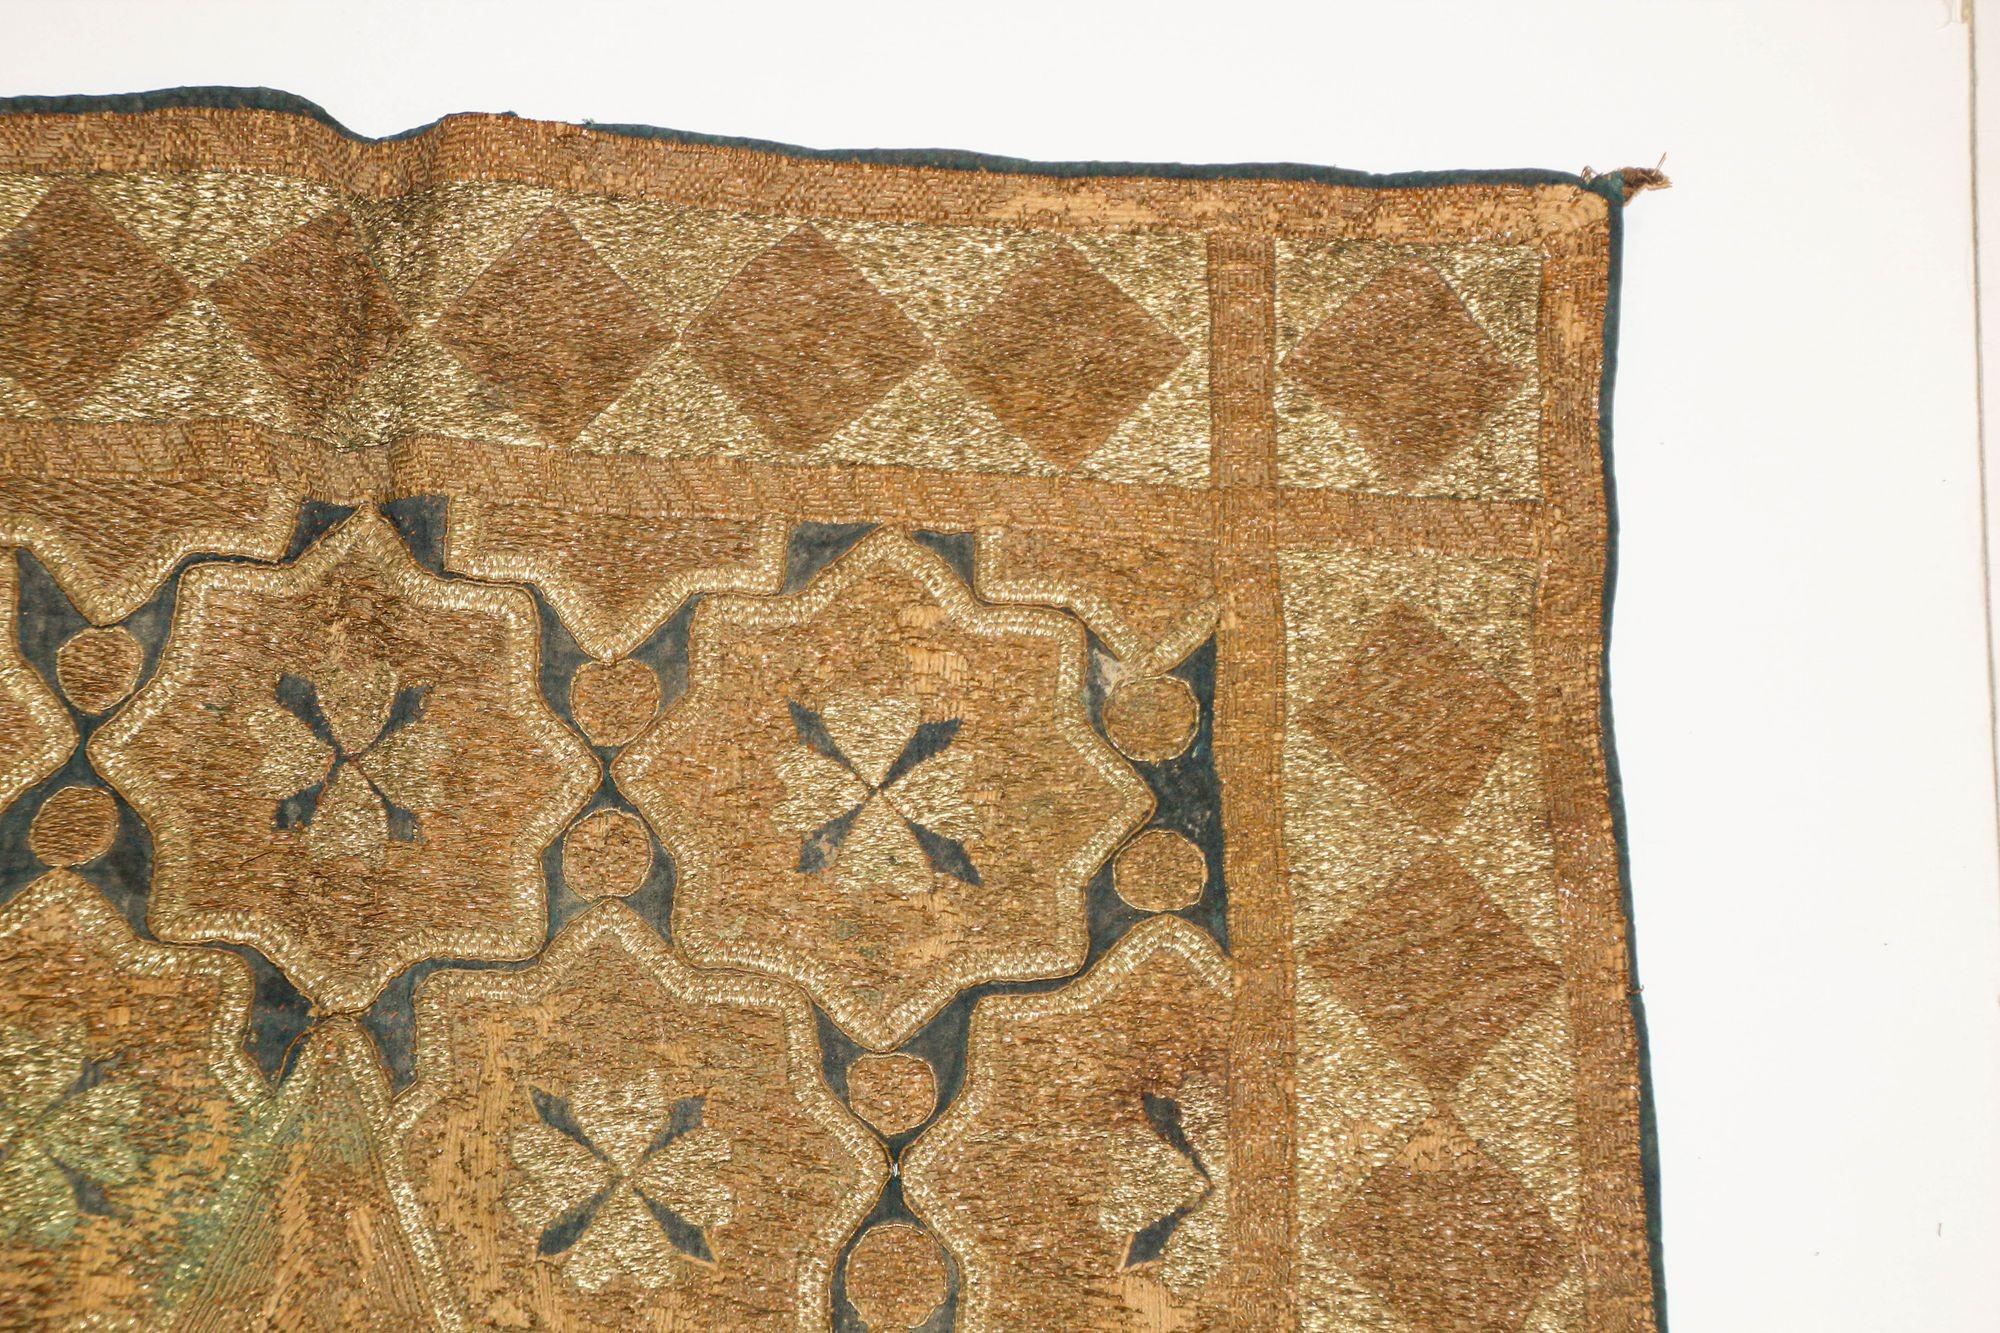 Hand-Crafted 19th Century Islamic Art Ottoman Metallic Threads Arched Fragment Textile For Sale